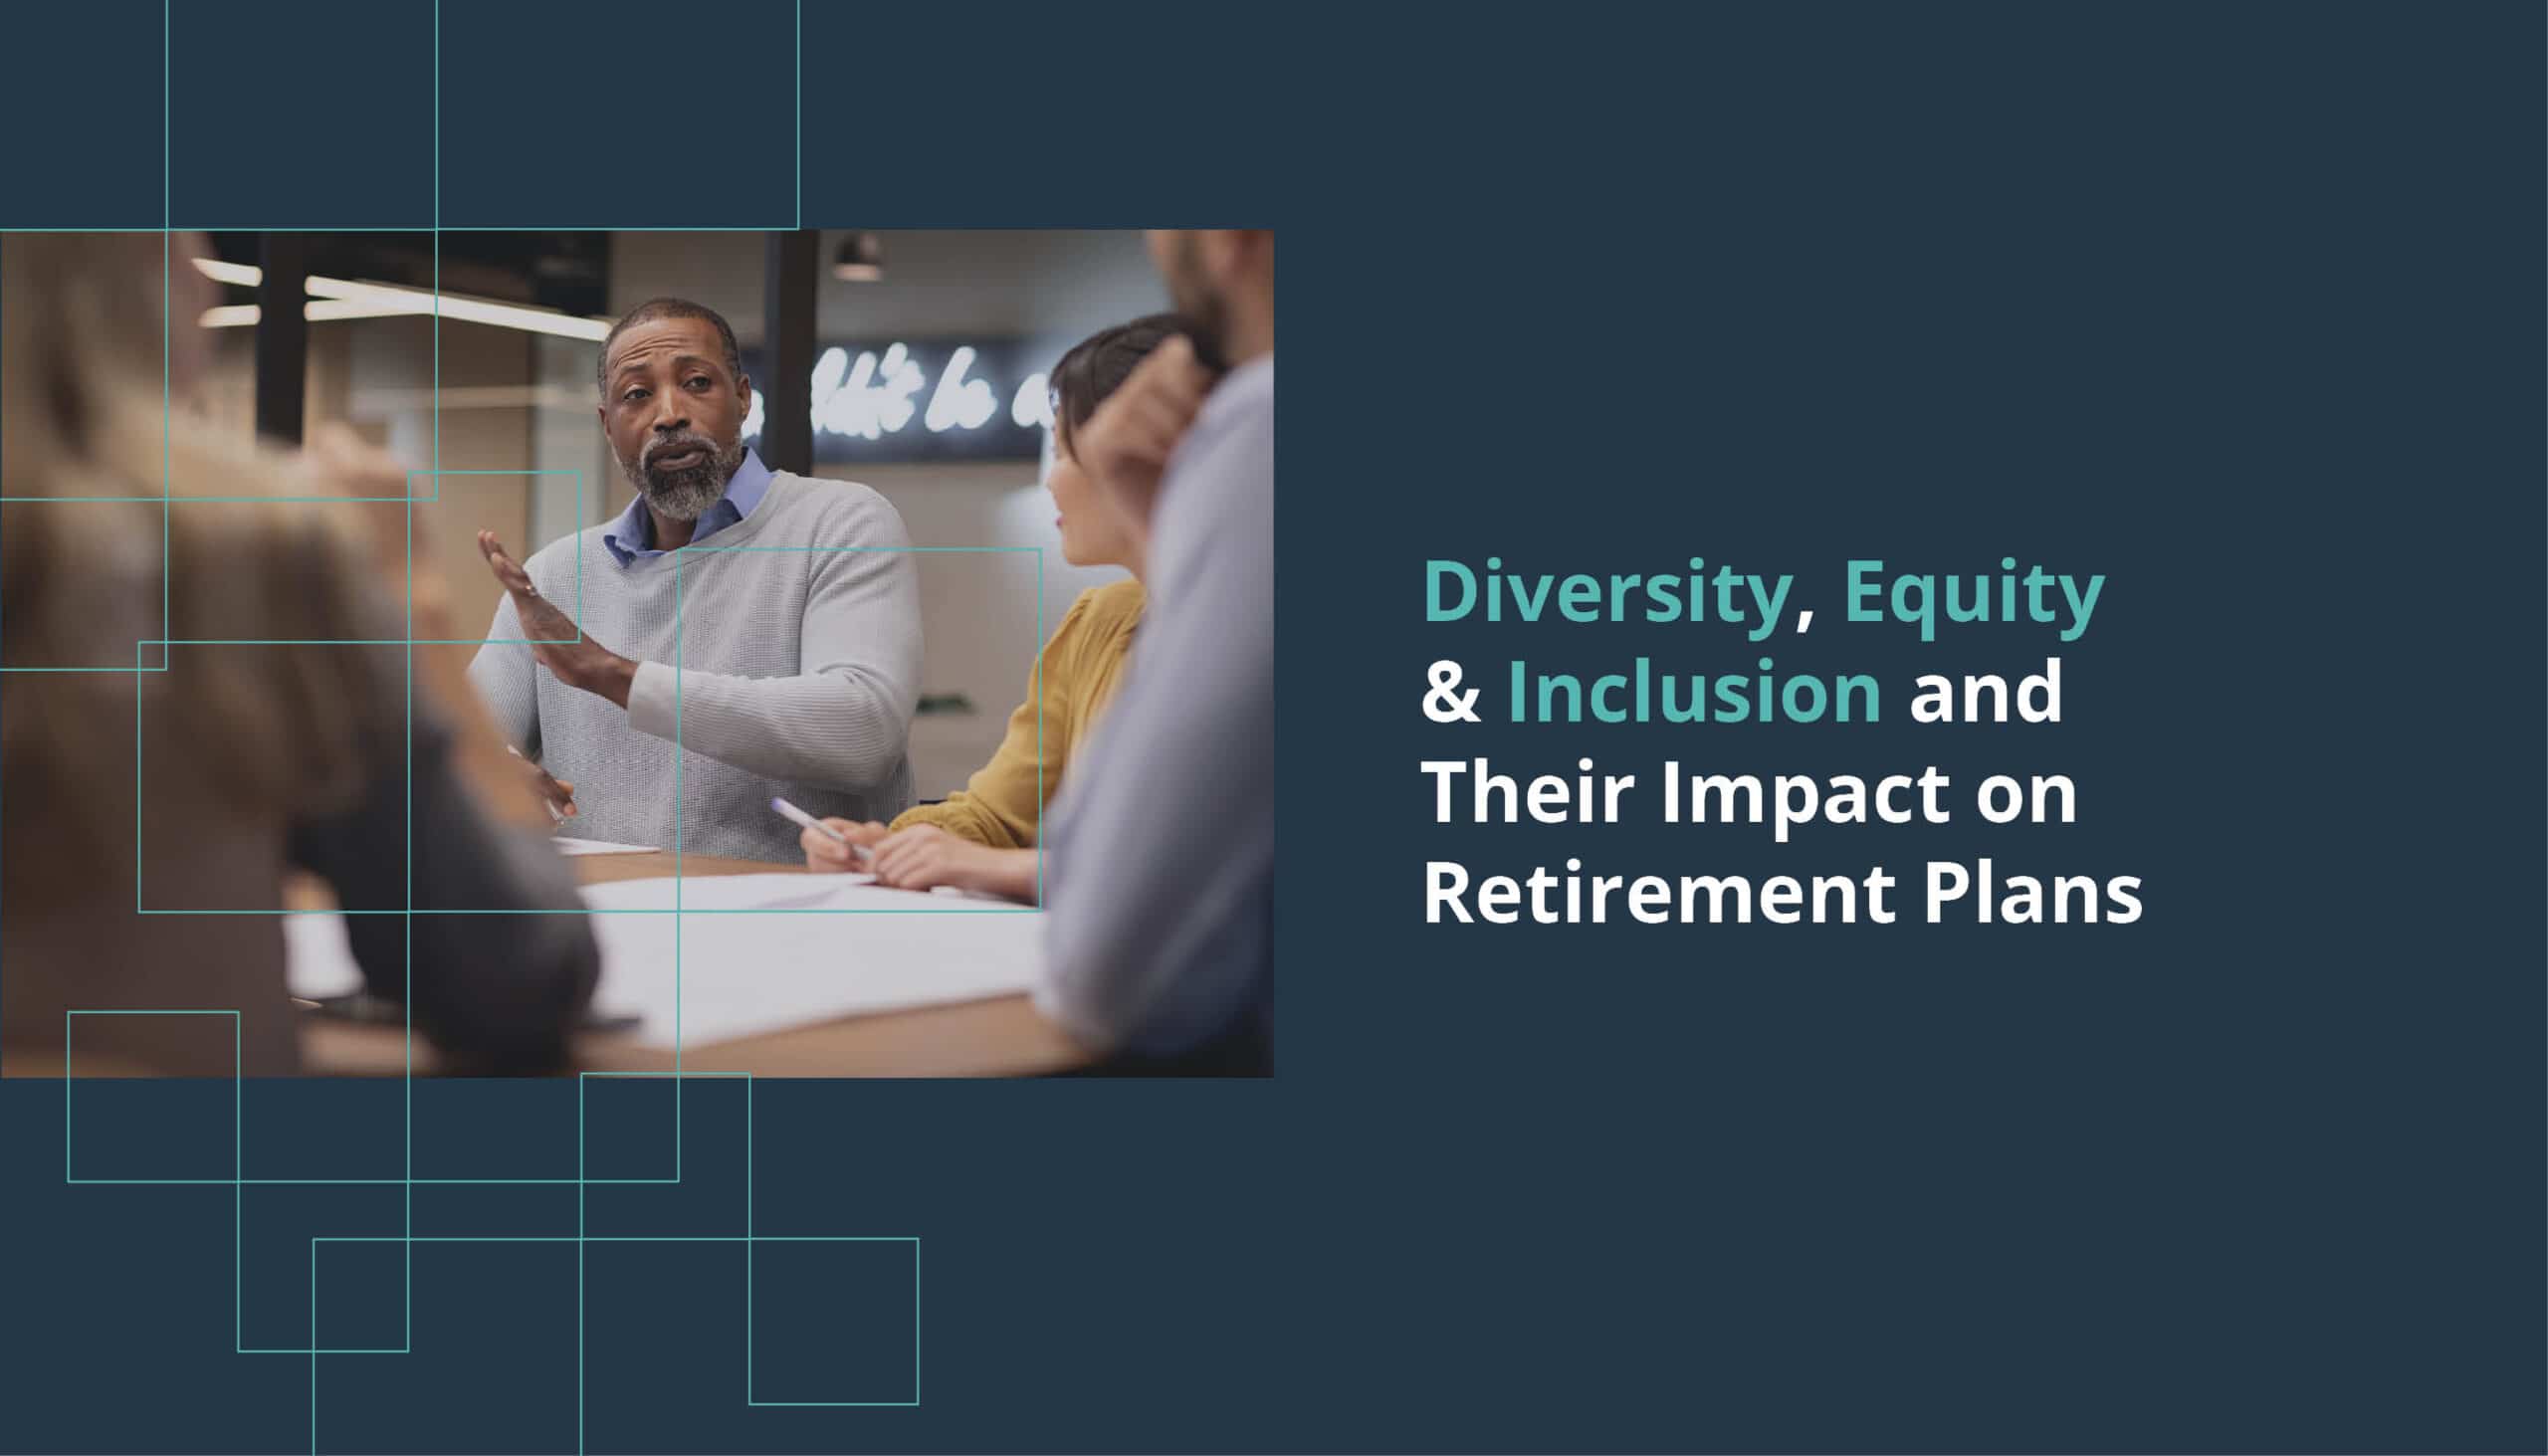 Diversity, Equity and Inclusion and its Impact on Retirement Plans